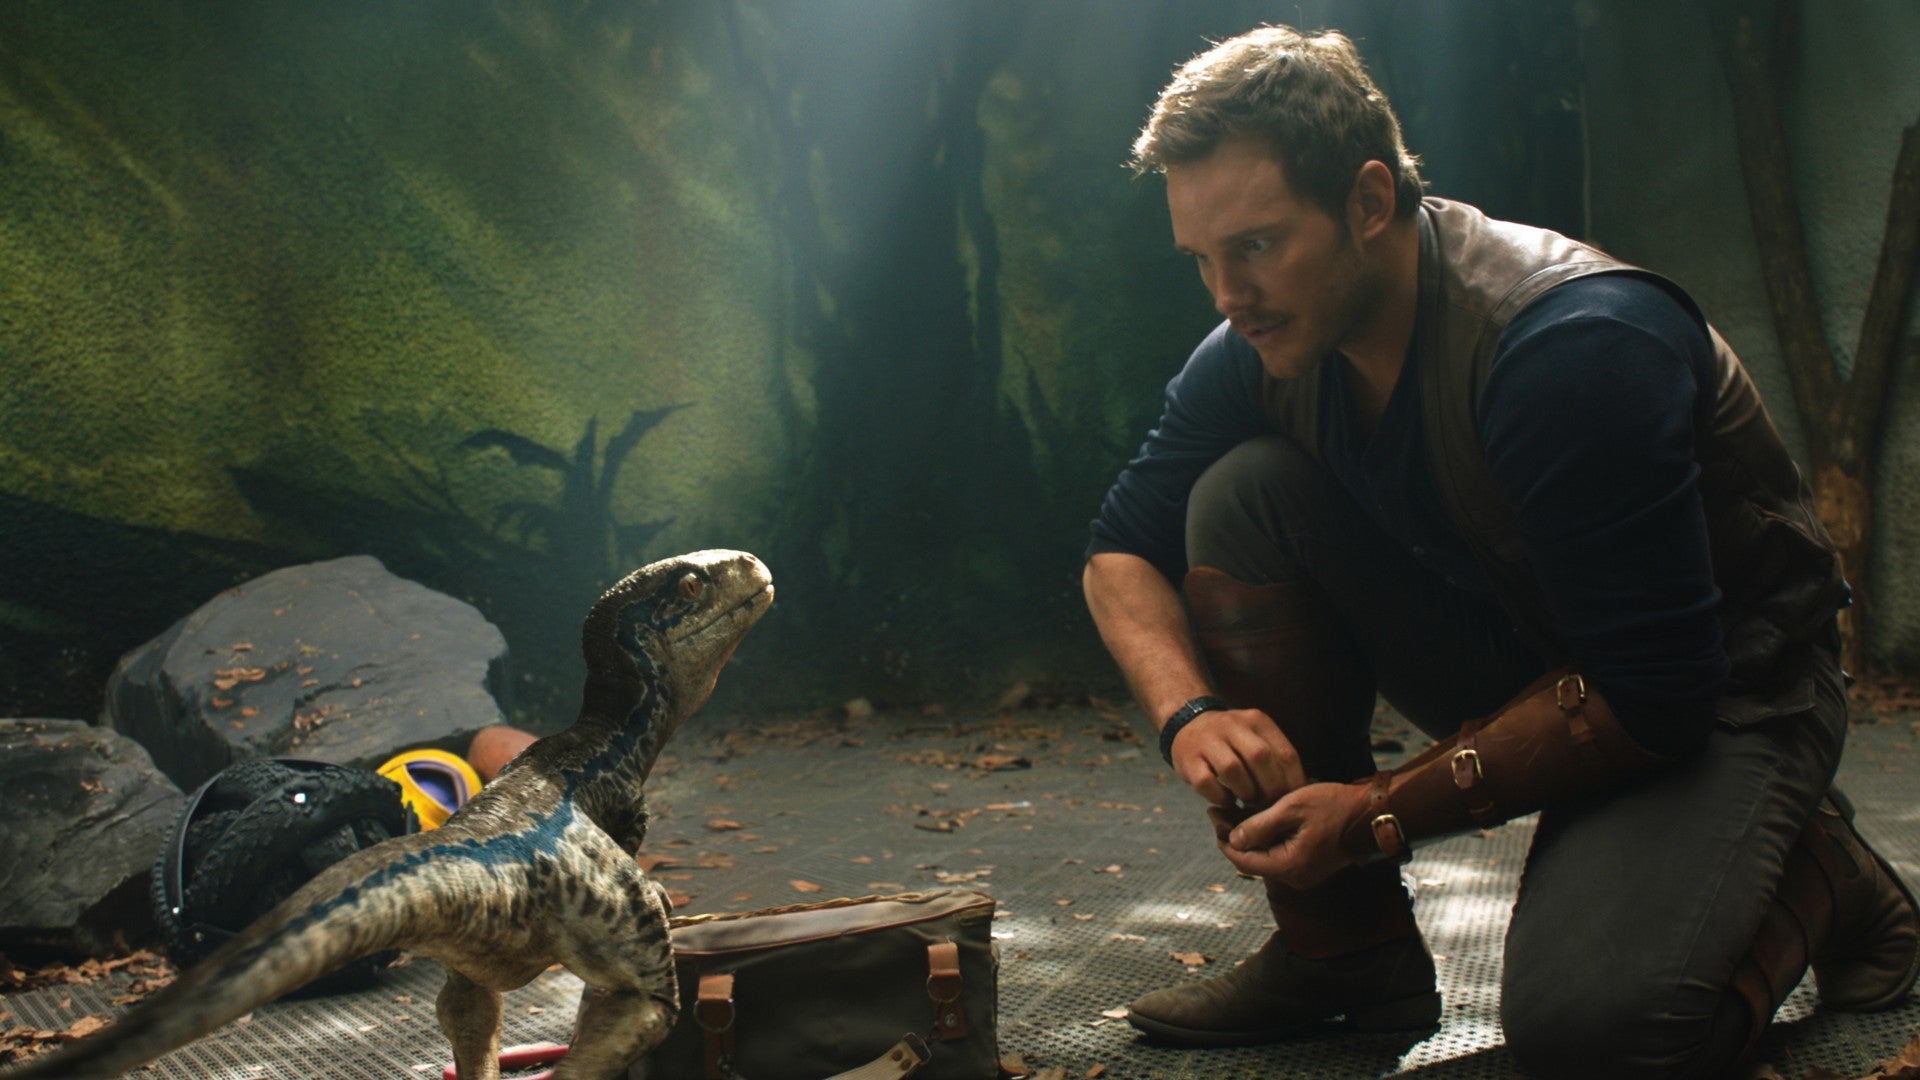 The relationship with Blue the raptor is crucial. (Image: Universal)